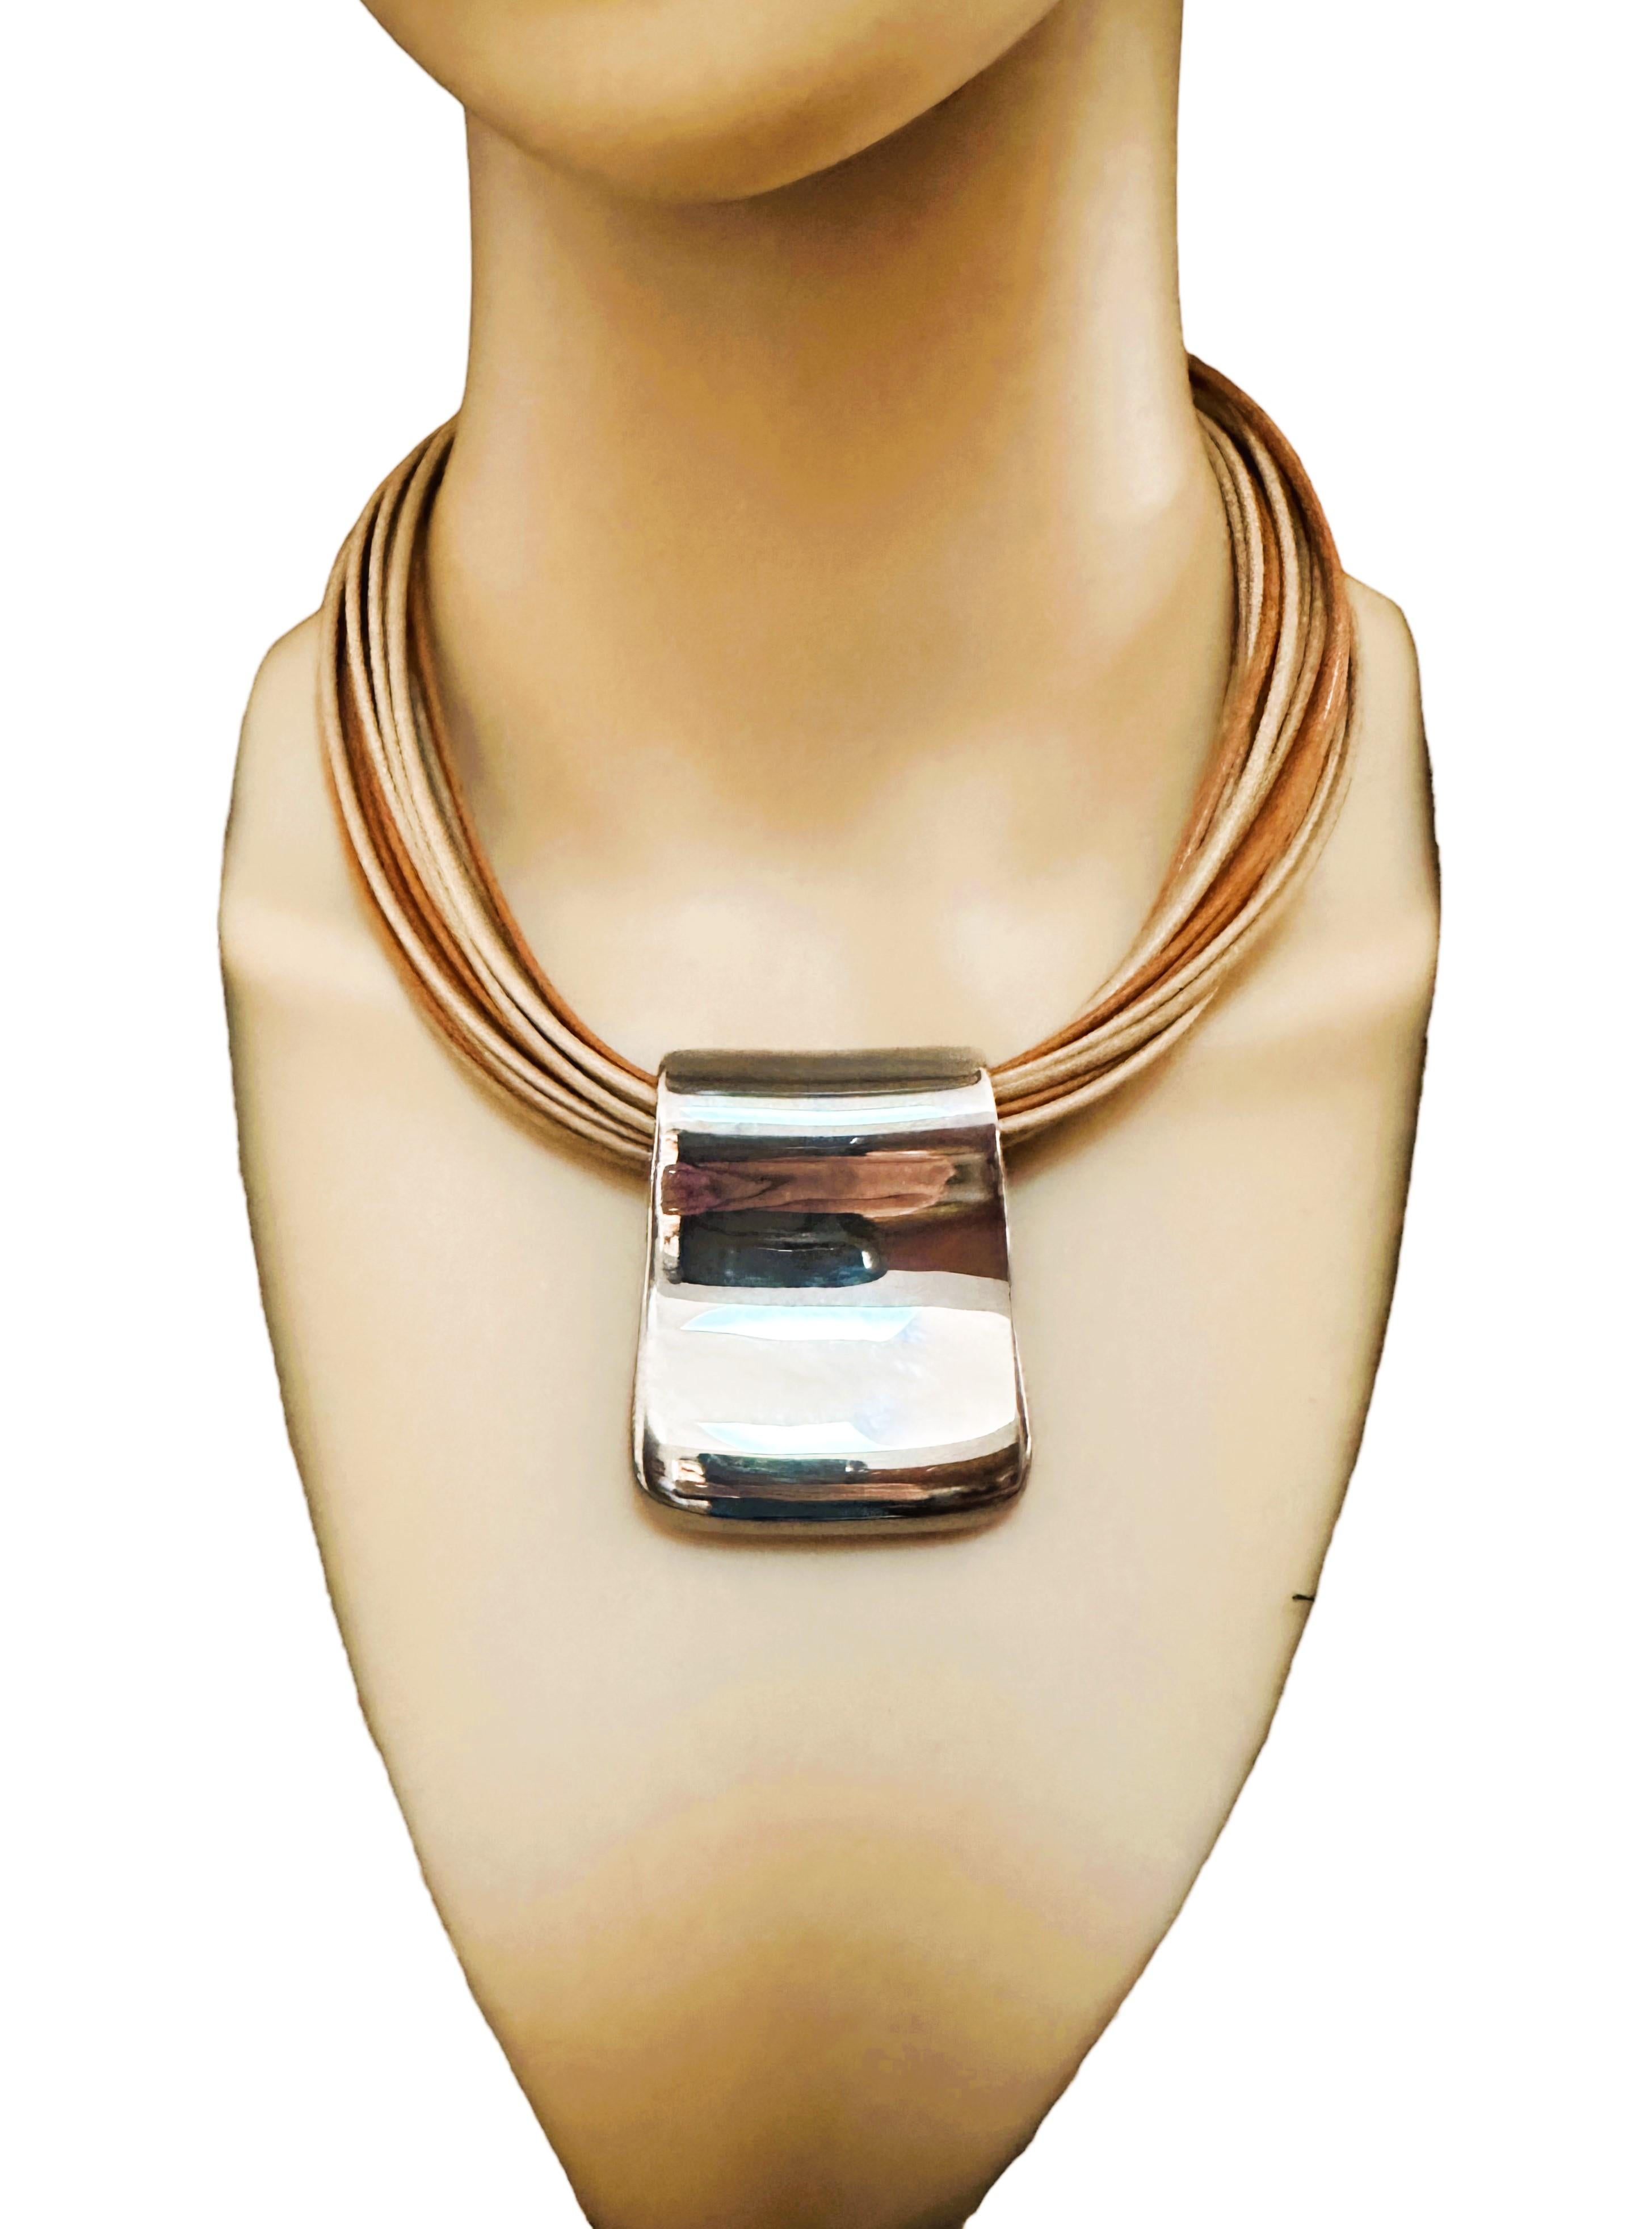 Italian Milor Italy Leather Strand Necklace with Sterling Pendant 1